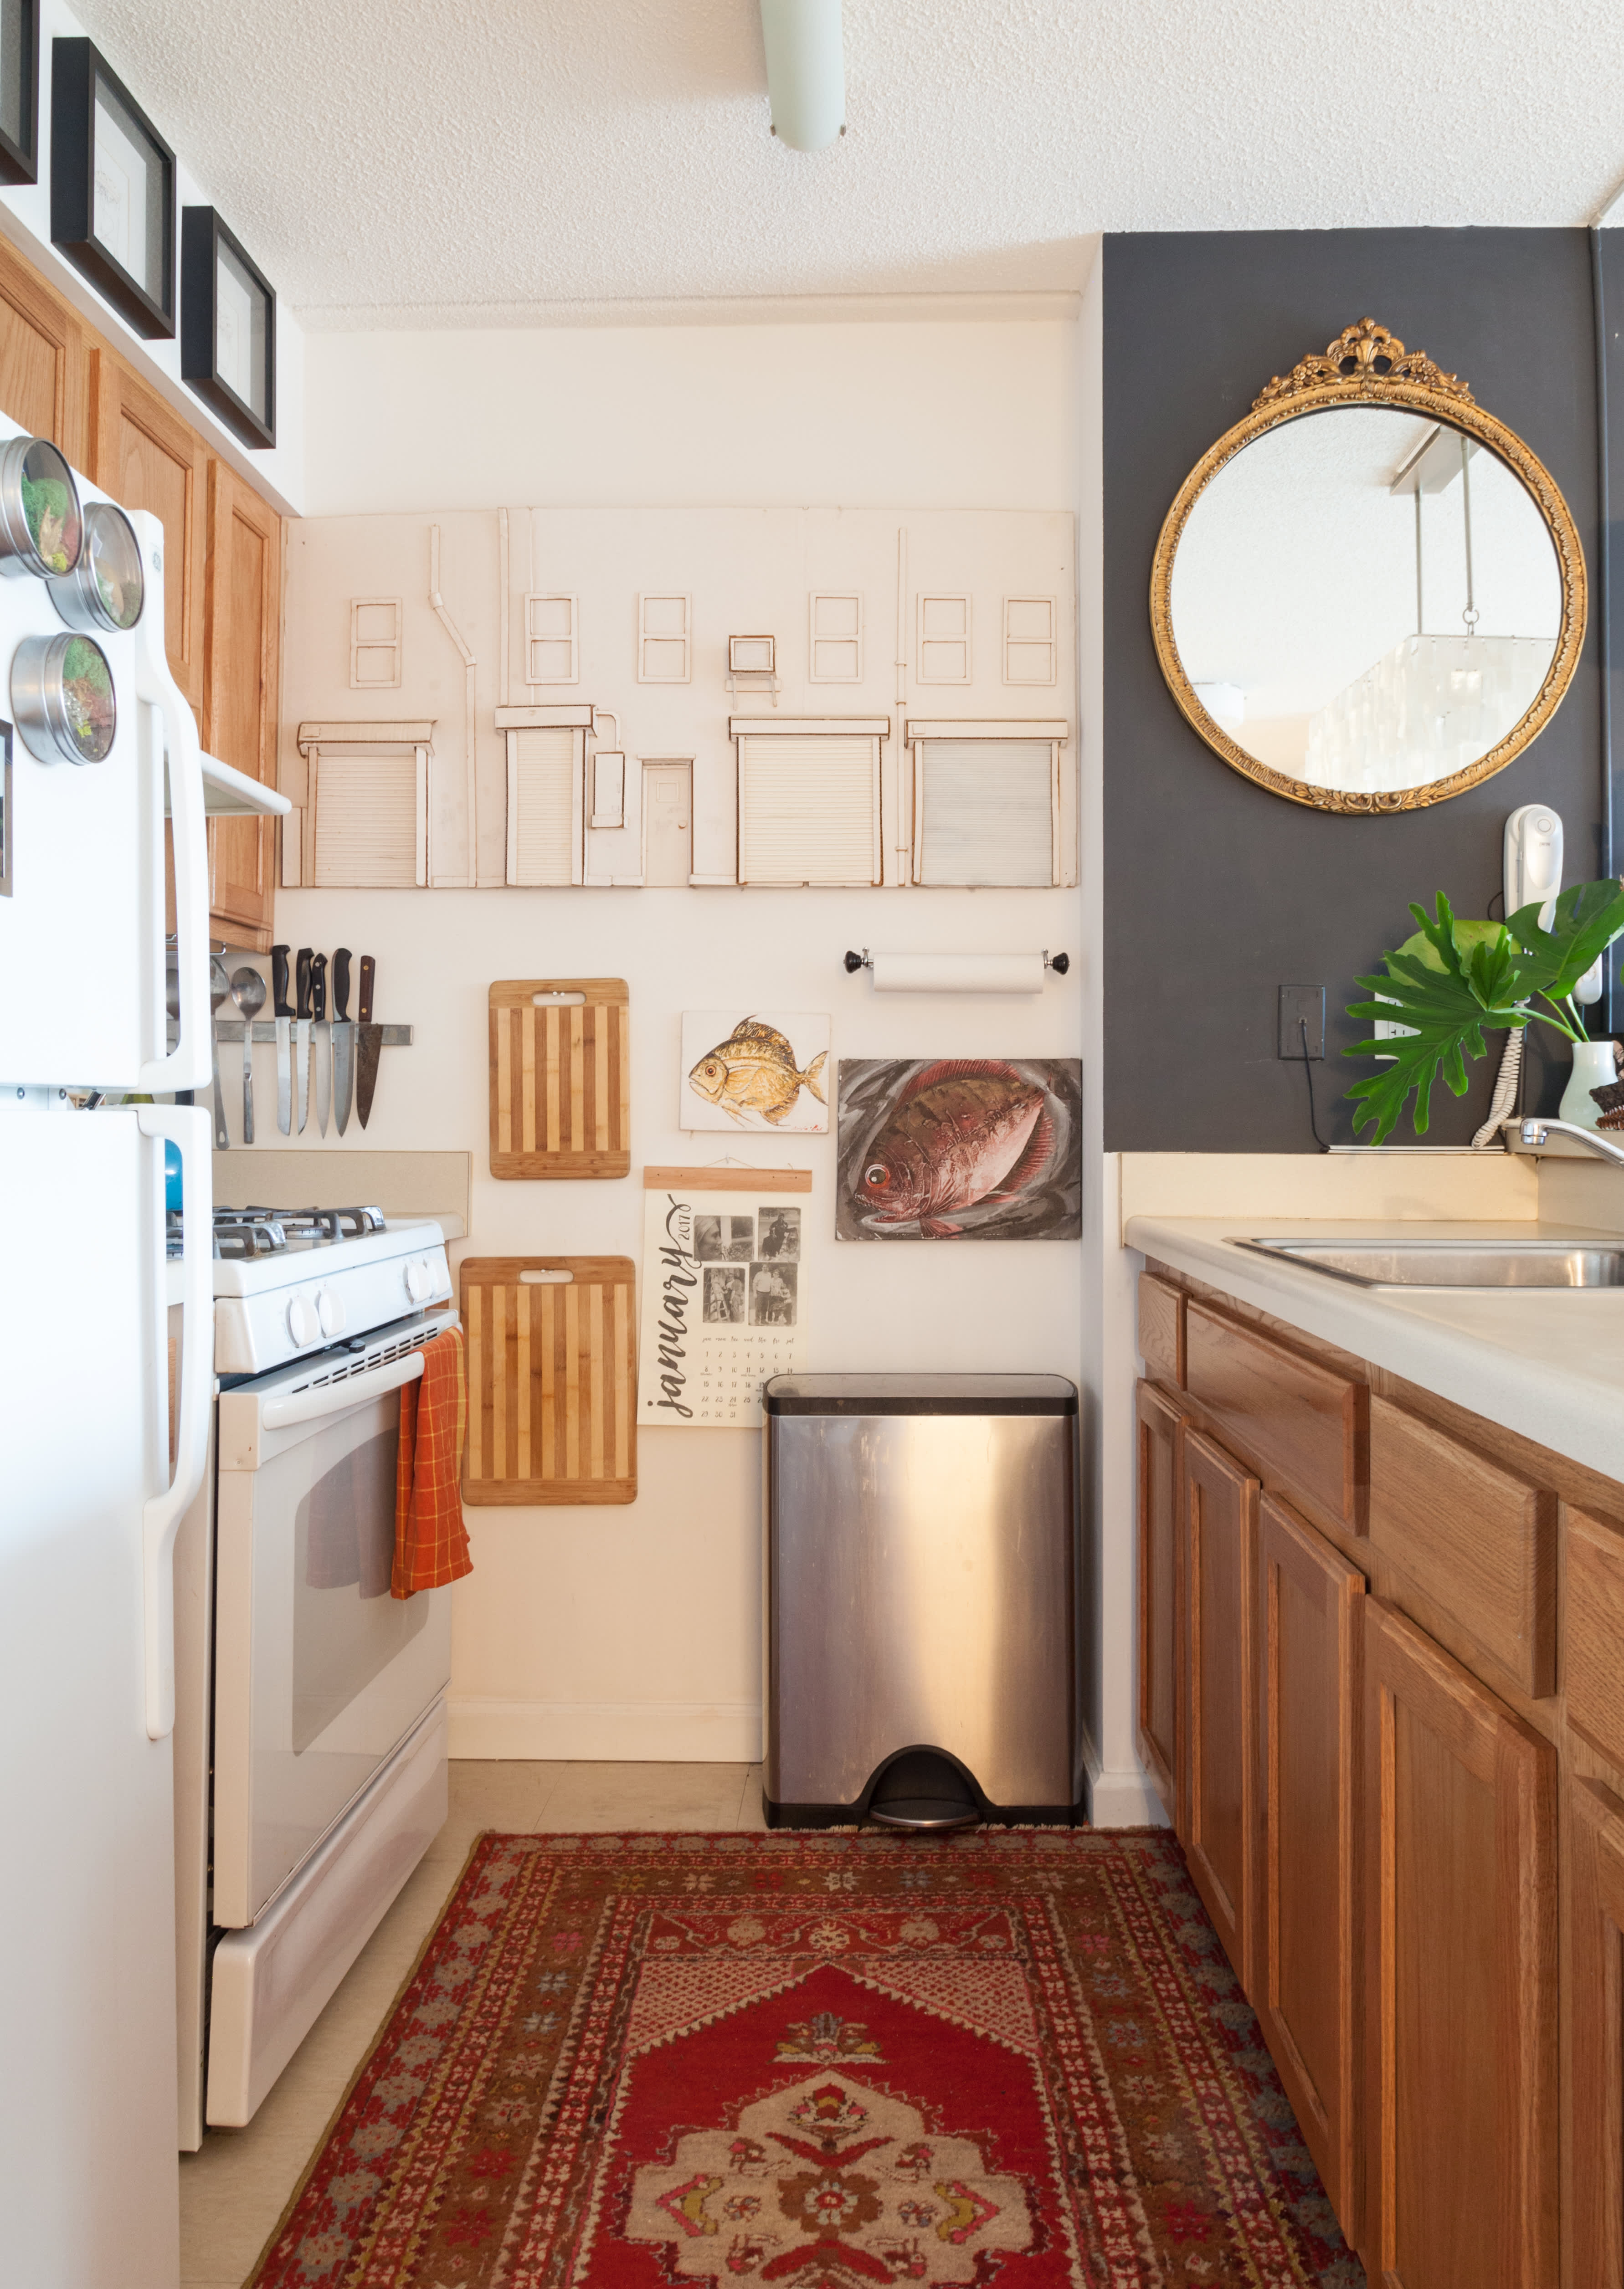 13 Space-Making Hacks for Small Kitchens